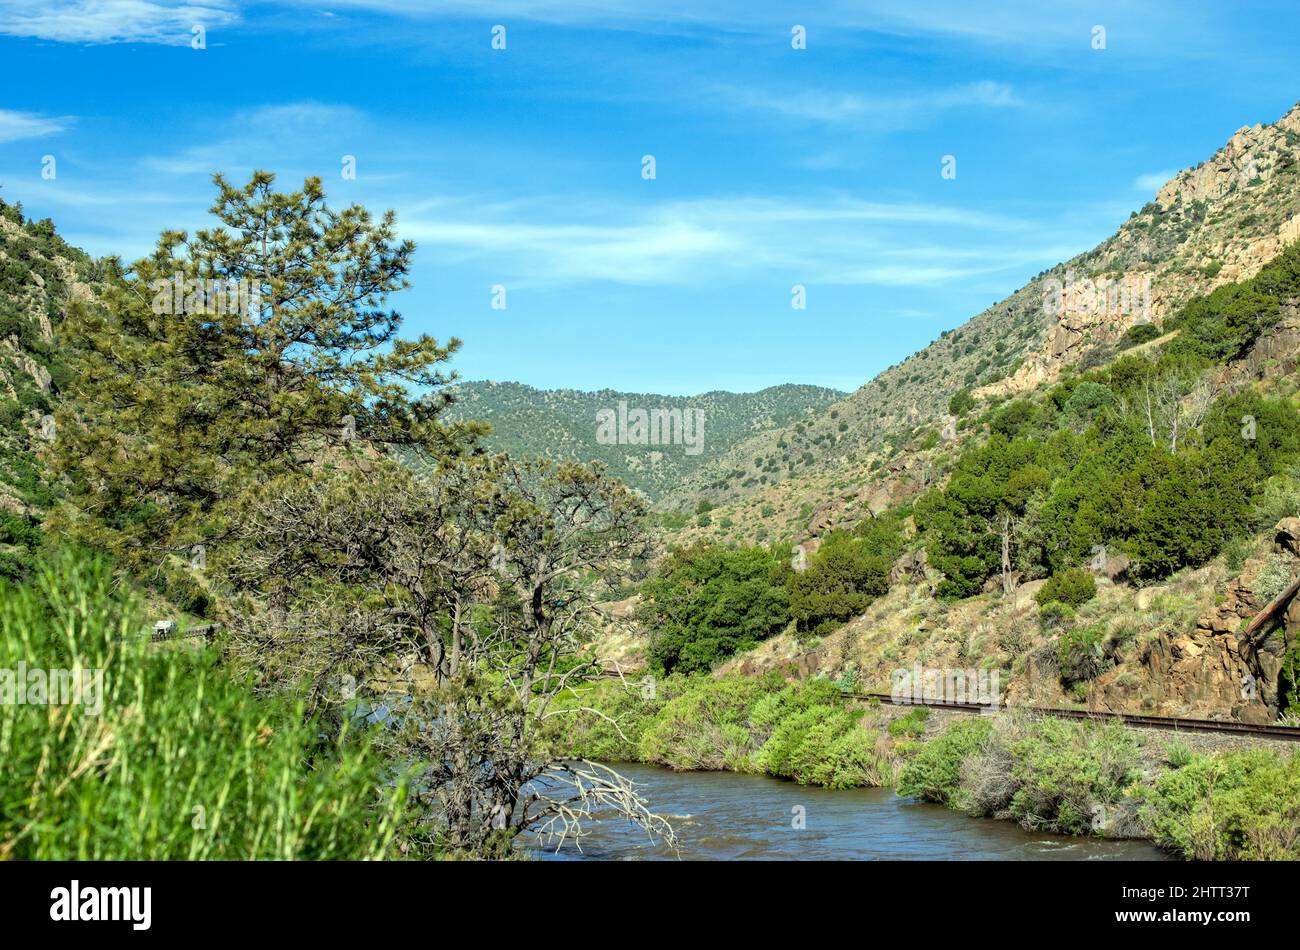 A picturesque mountain scene with gently rolling waters and a railroad track on a warm day in Colorado. Stock Photo